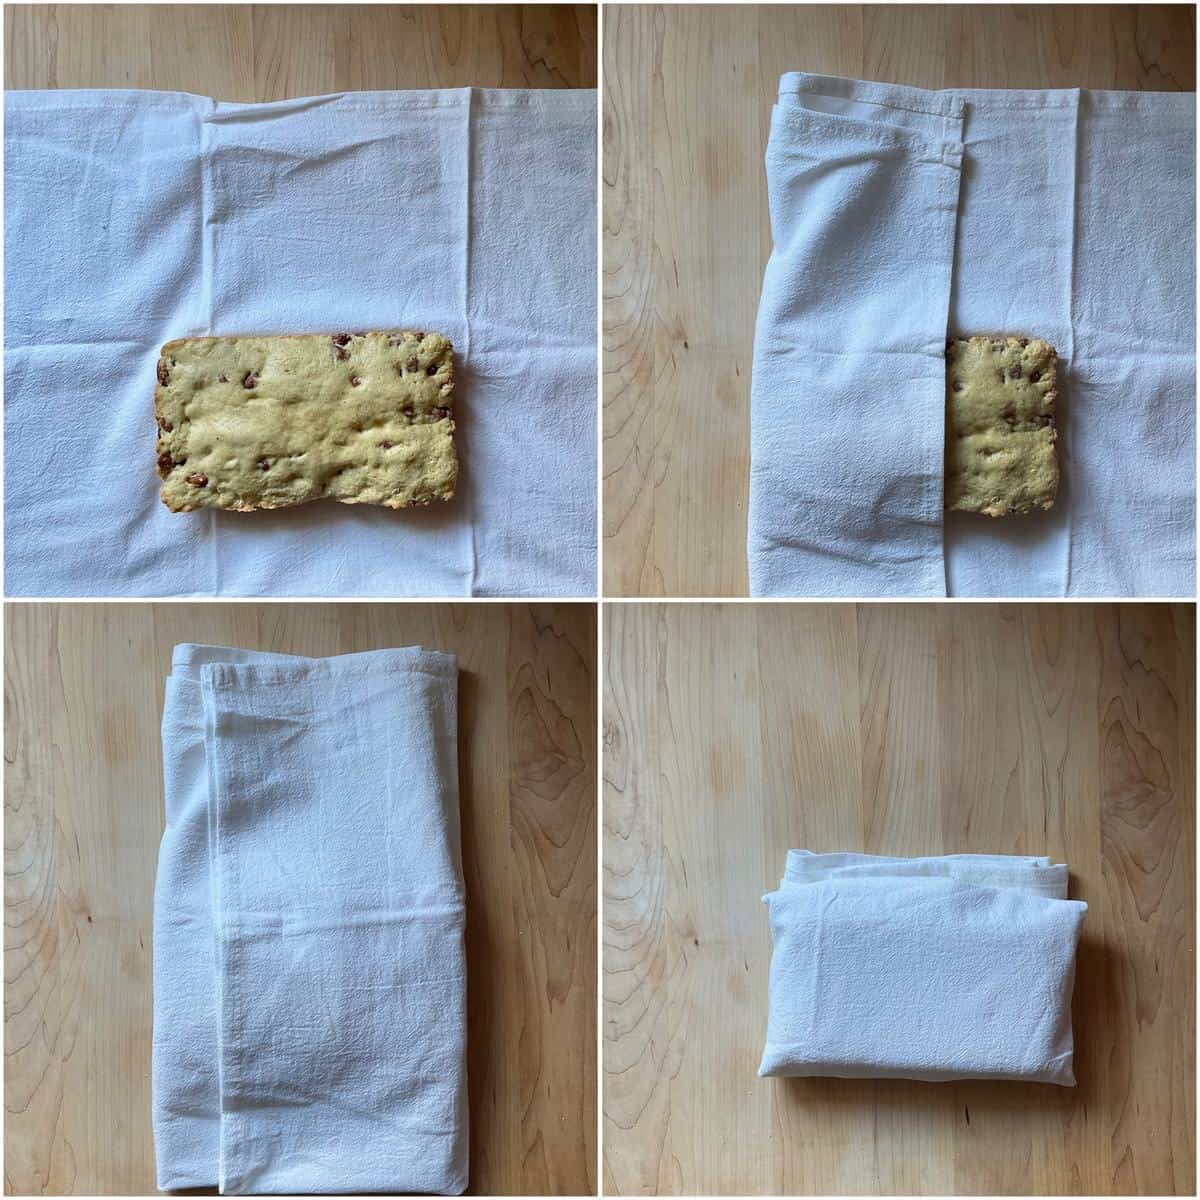 A photo collage of an almond bread loaf being wrapped in a tea towel.